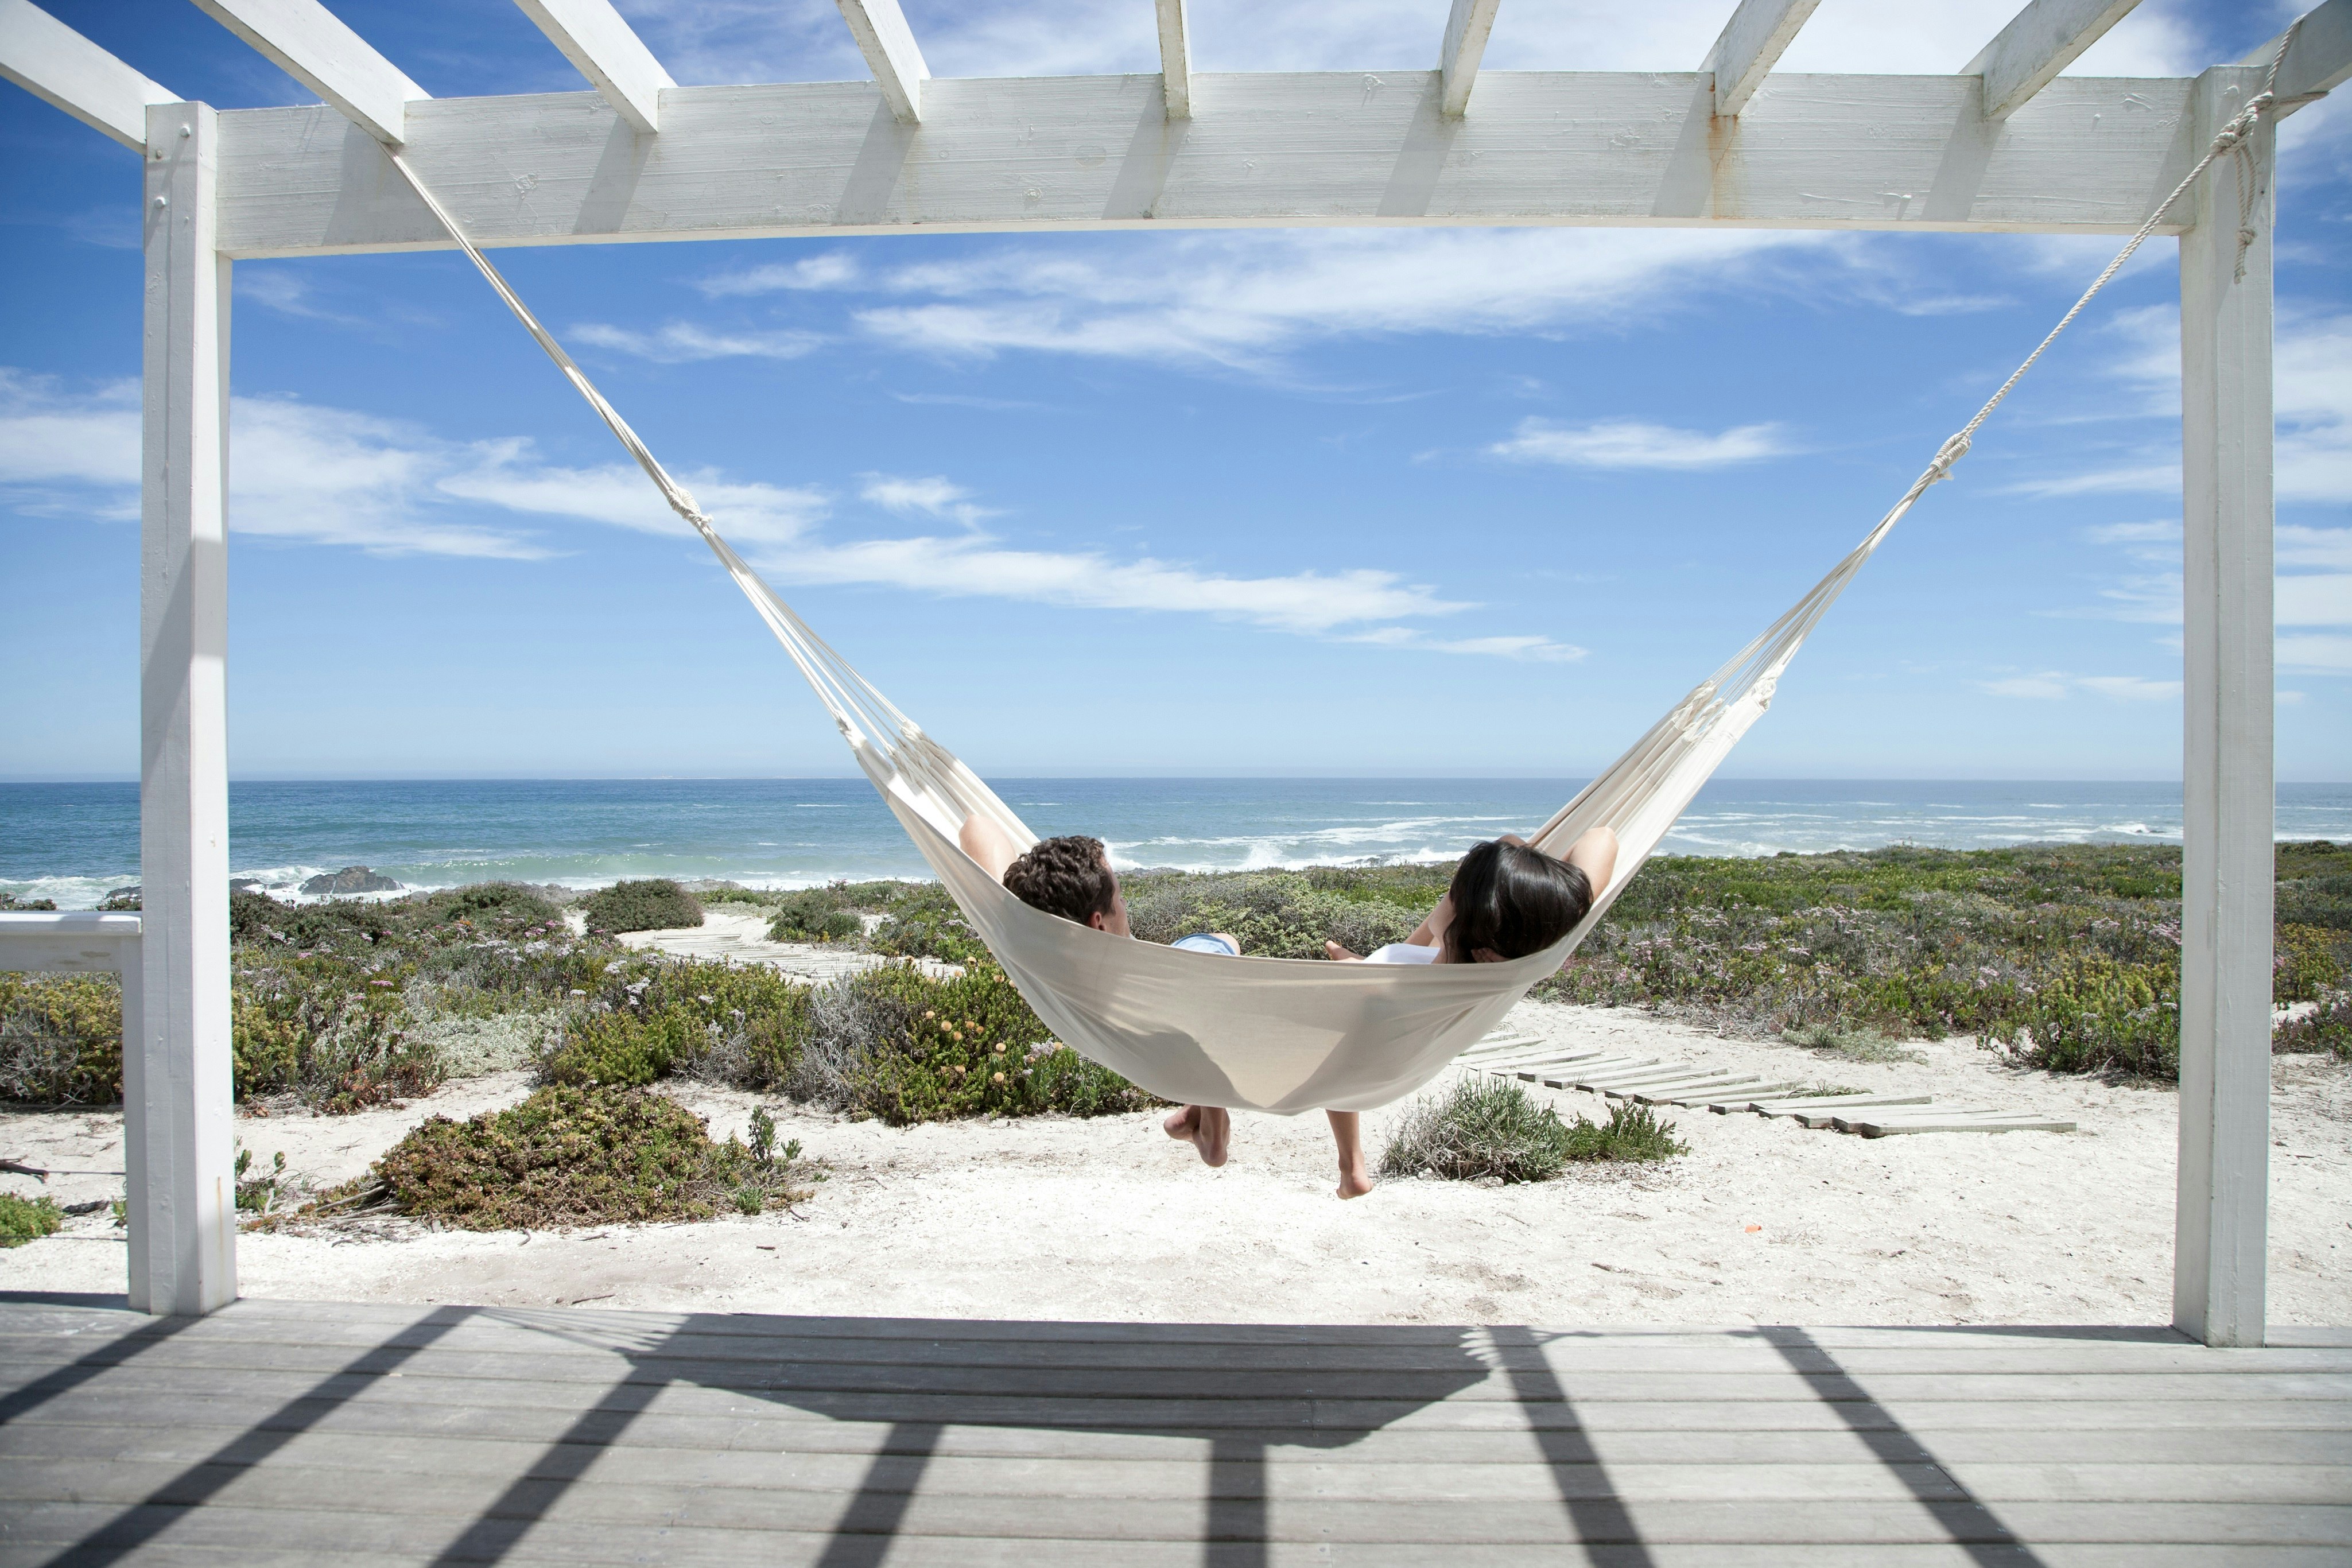 Two people doze serenely in a hammock facing a white beach and blue sea.